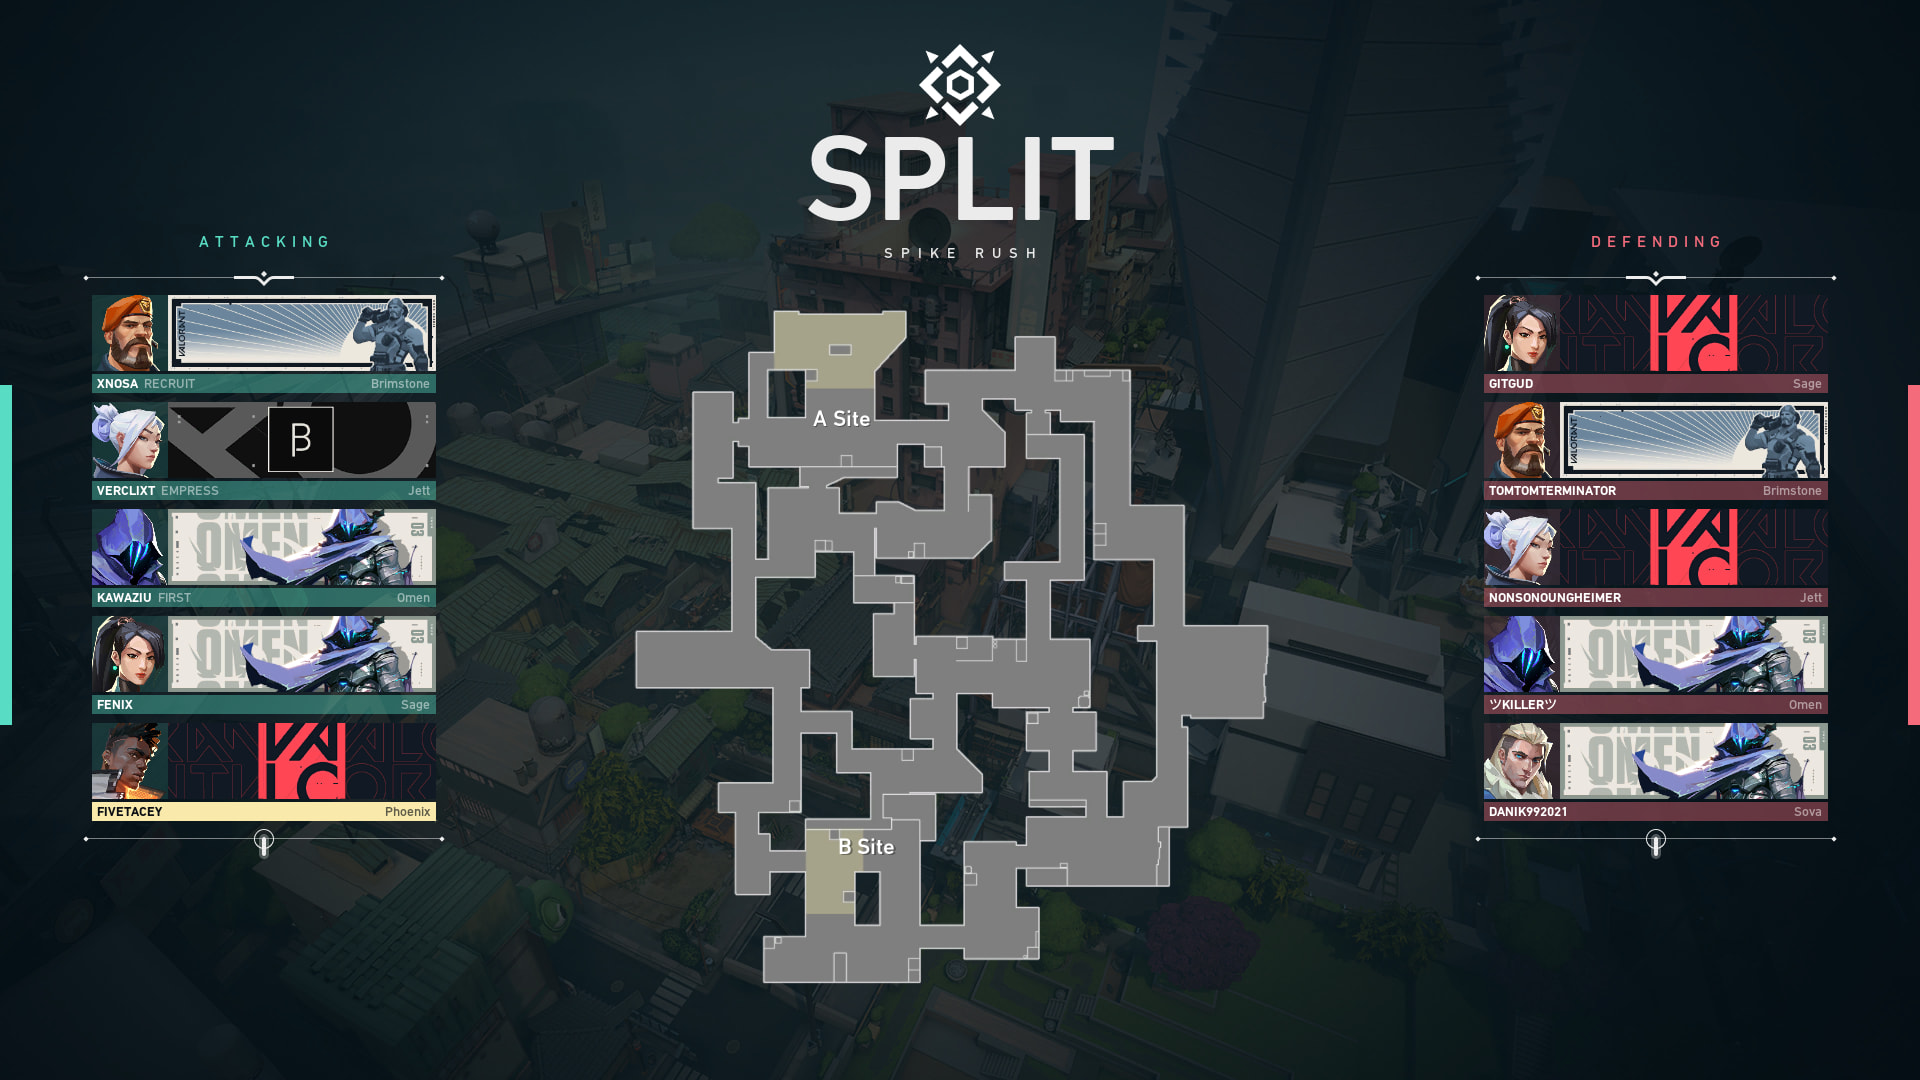 On Valorant (2020), in the map 'Split' there's a screen. If you go